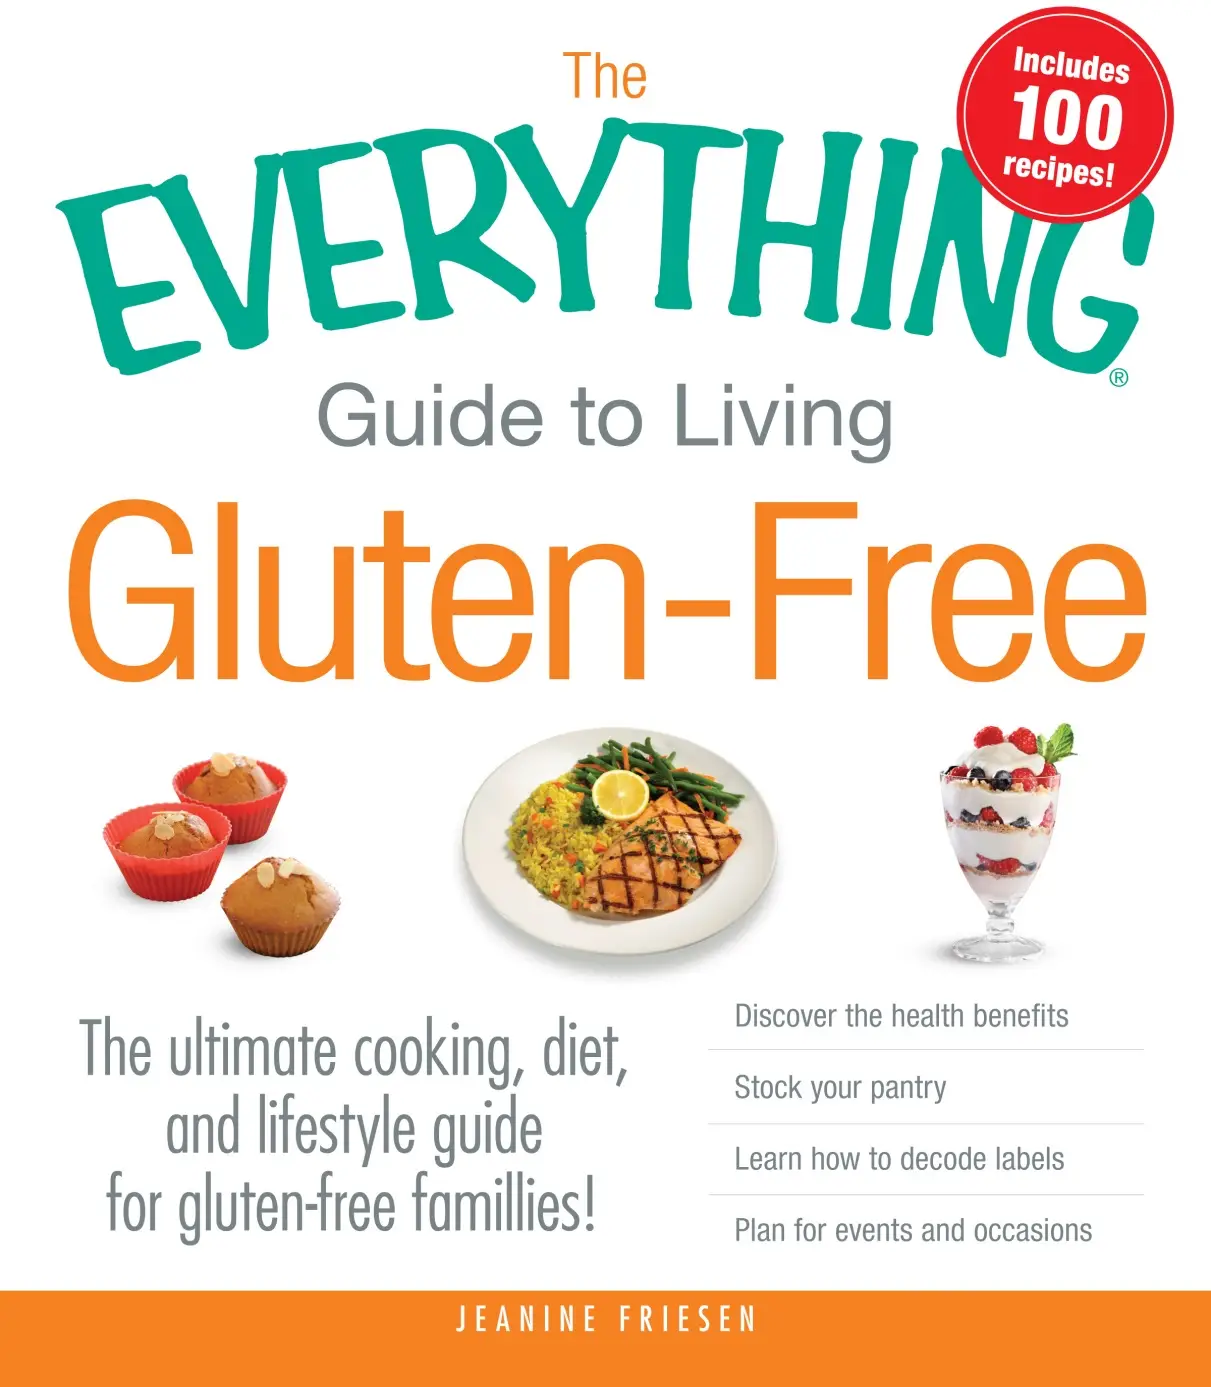 Everything Guide To Living Gluten Free Review